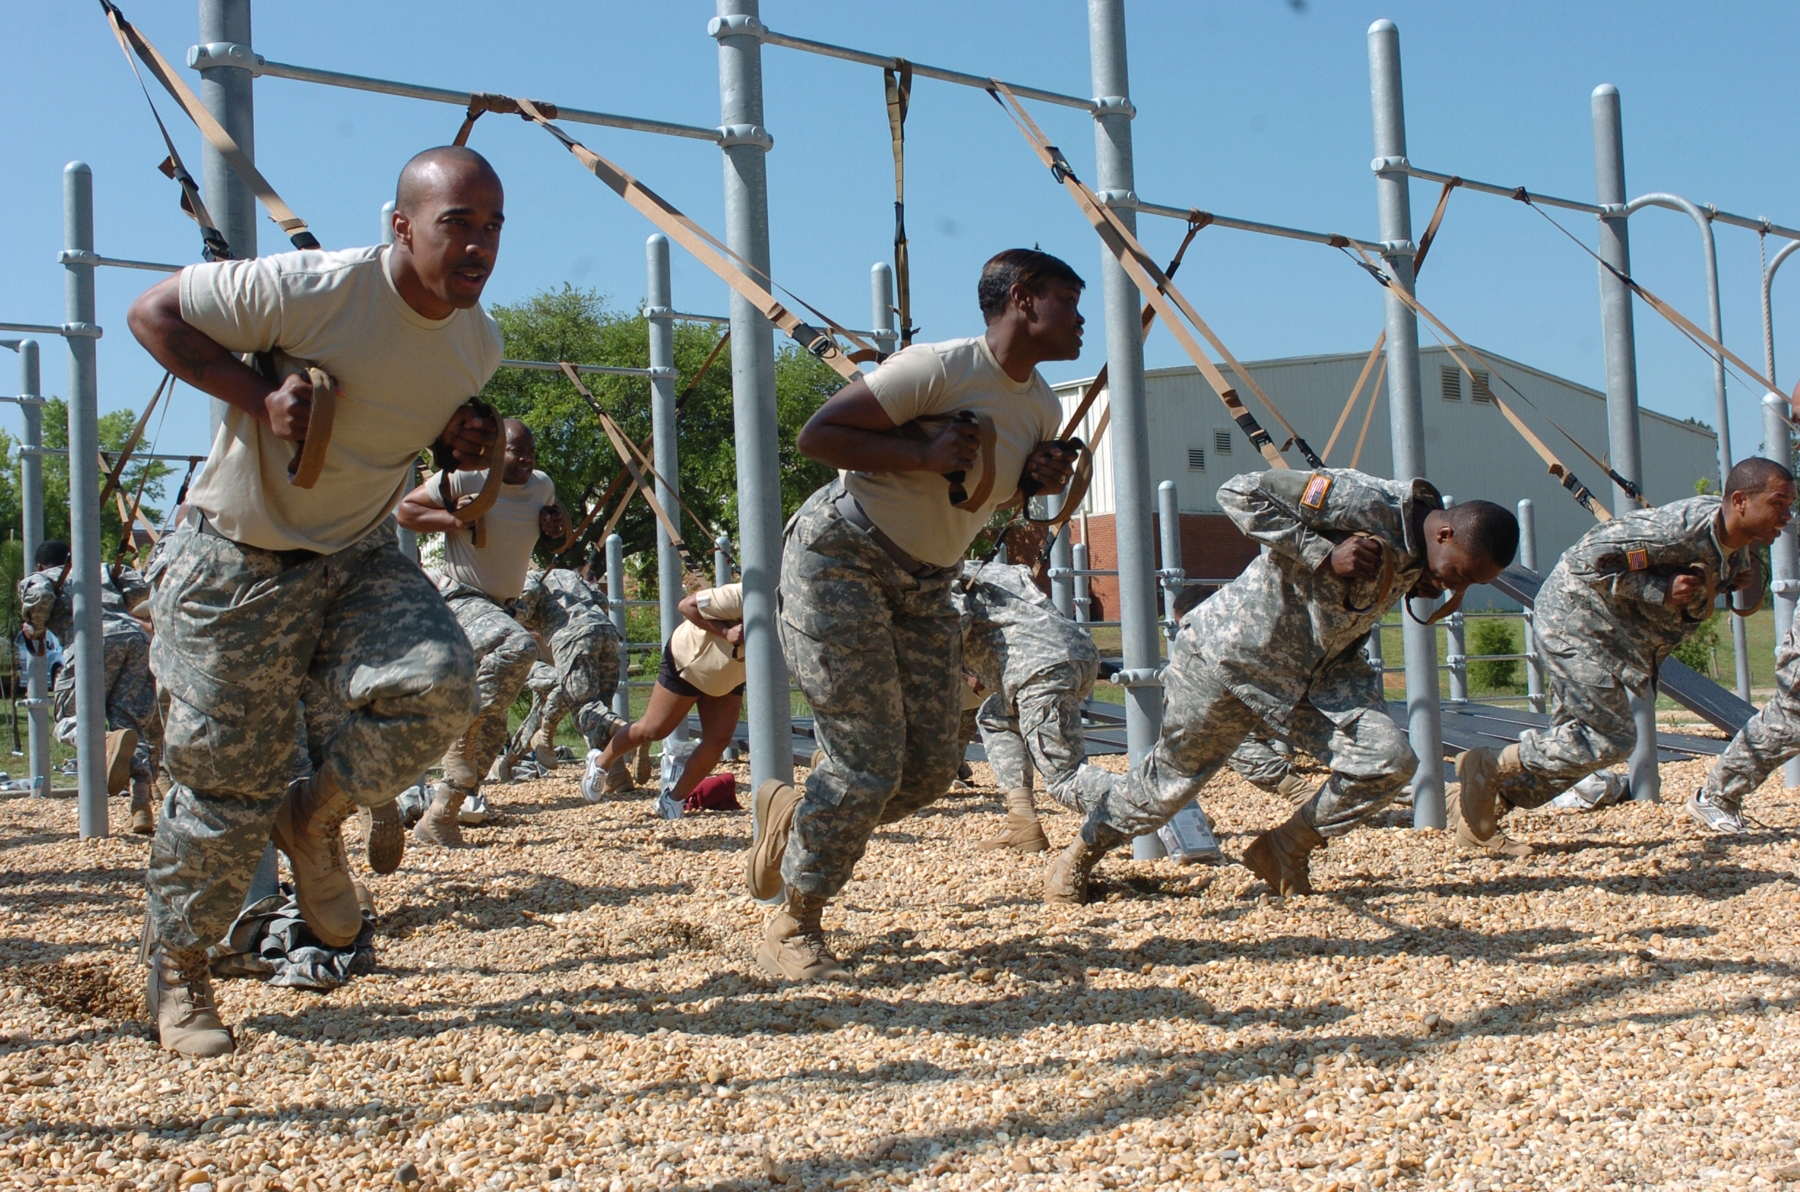 Keeping Soldiers Active First Prong on Performance Triad | DoDLive